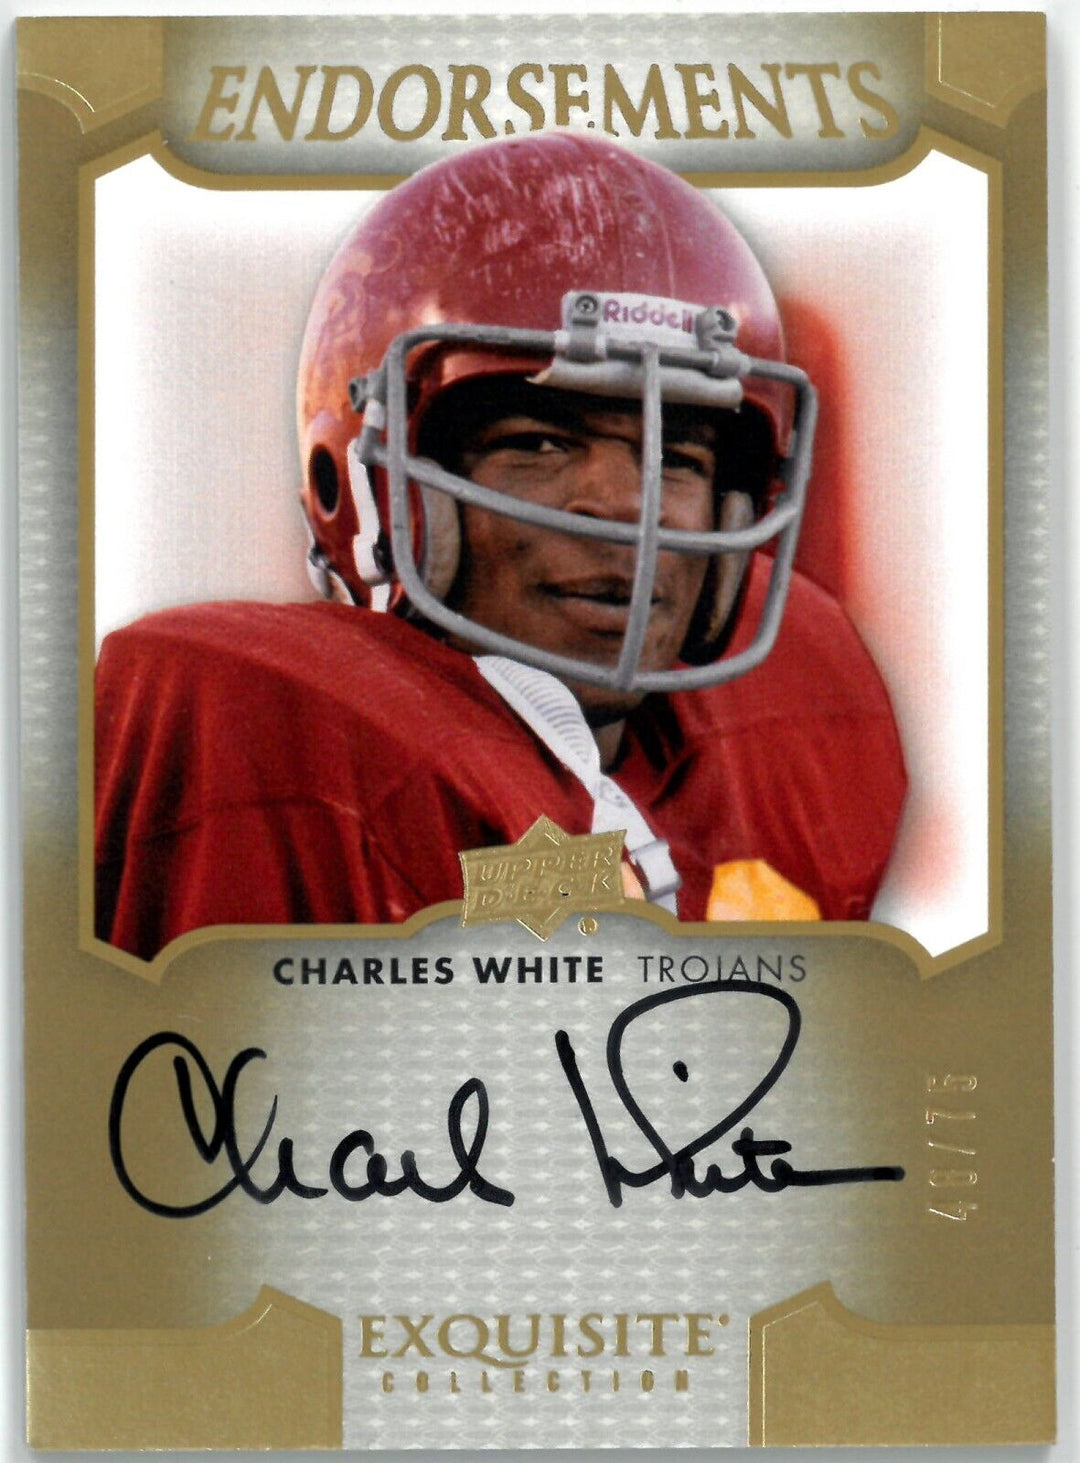 Charles White signed 2011 Upper Deck Exquisite Auto Card #E-CW- 49/75 (Heisman) Image 1